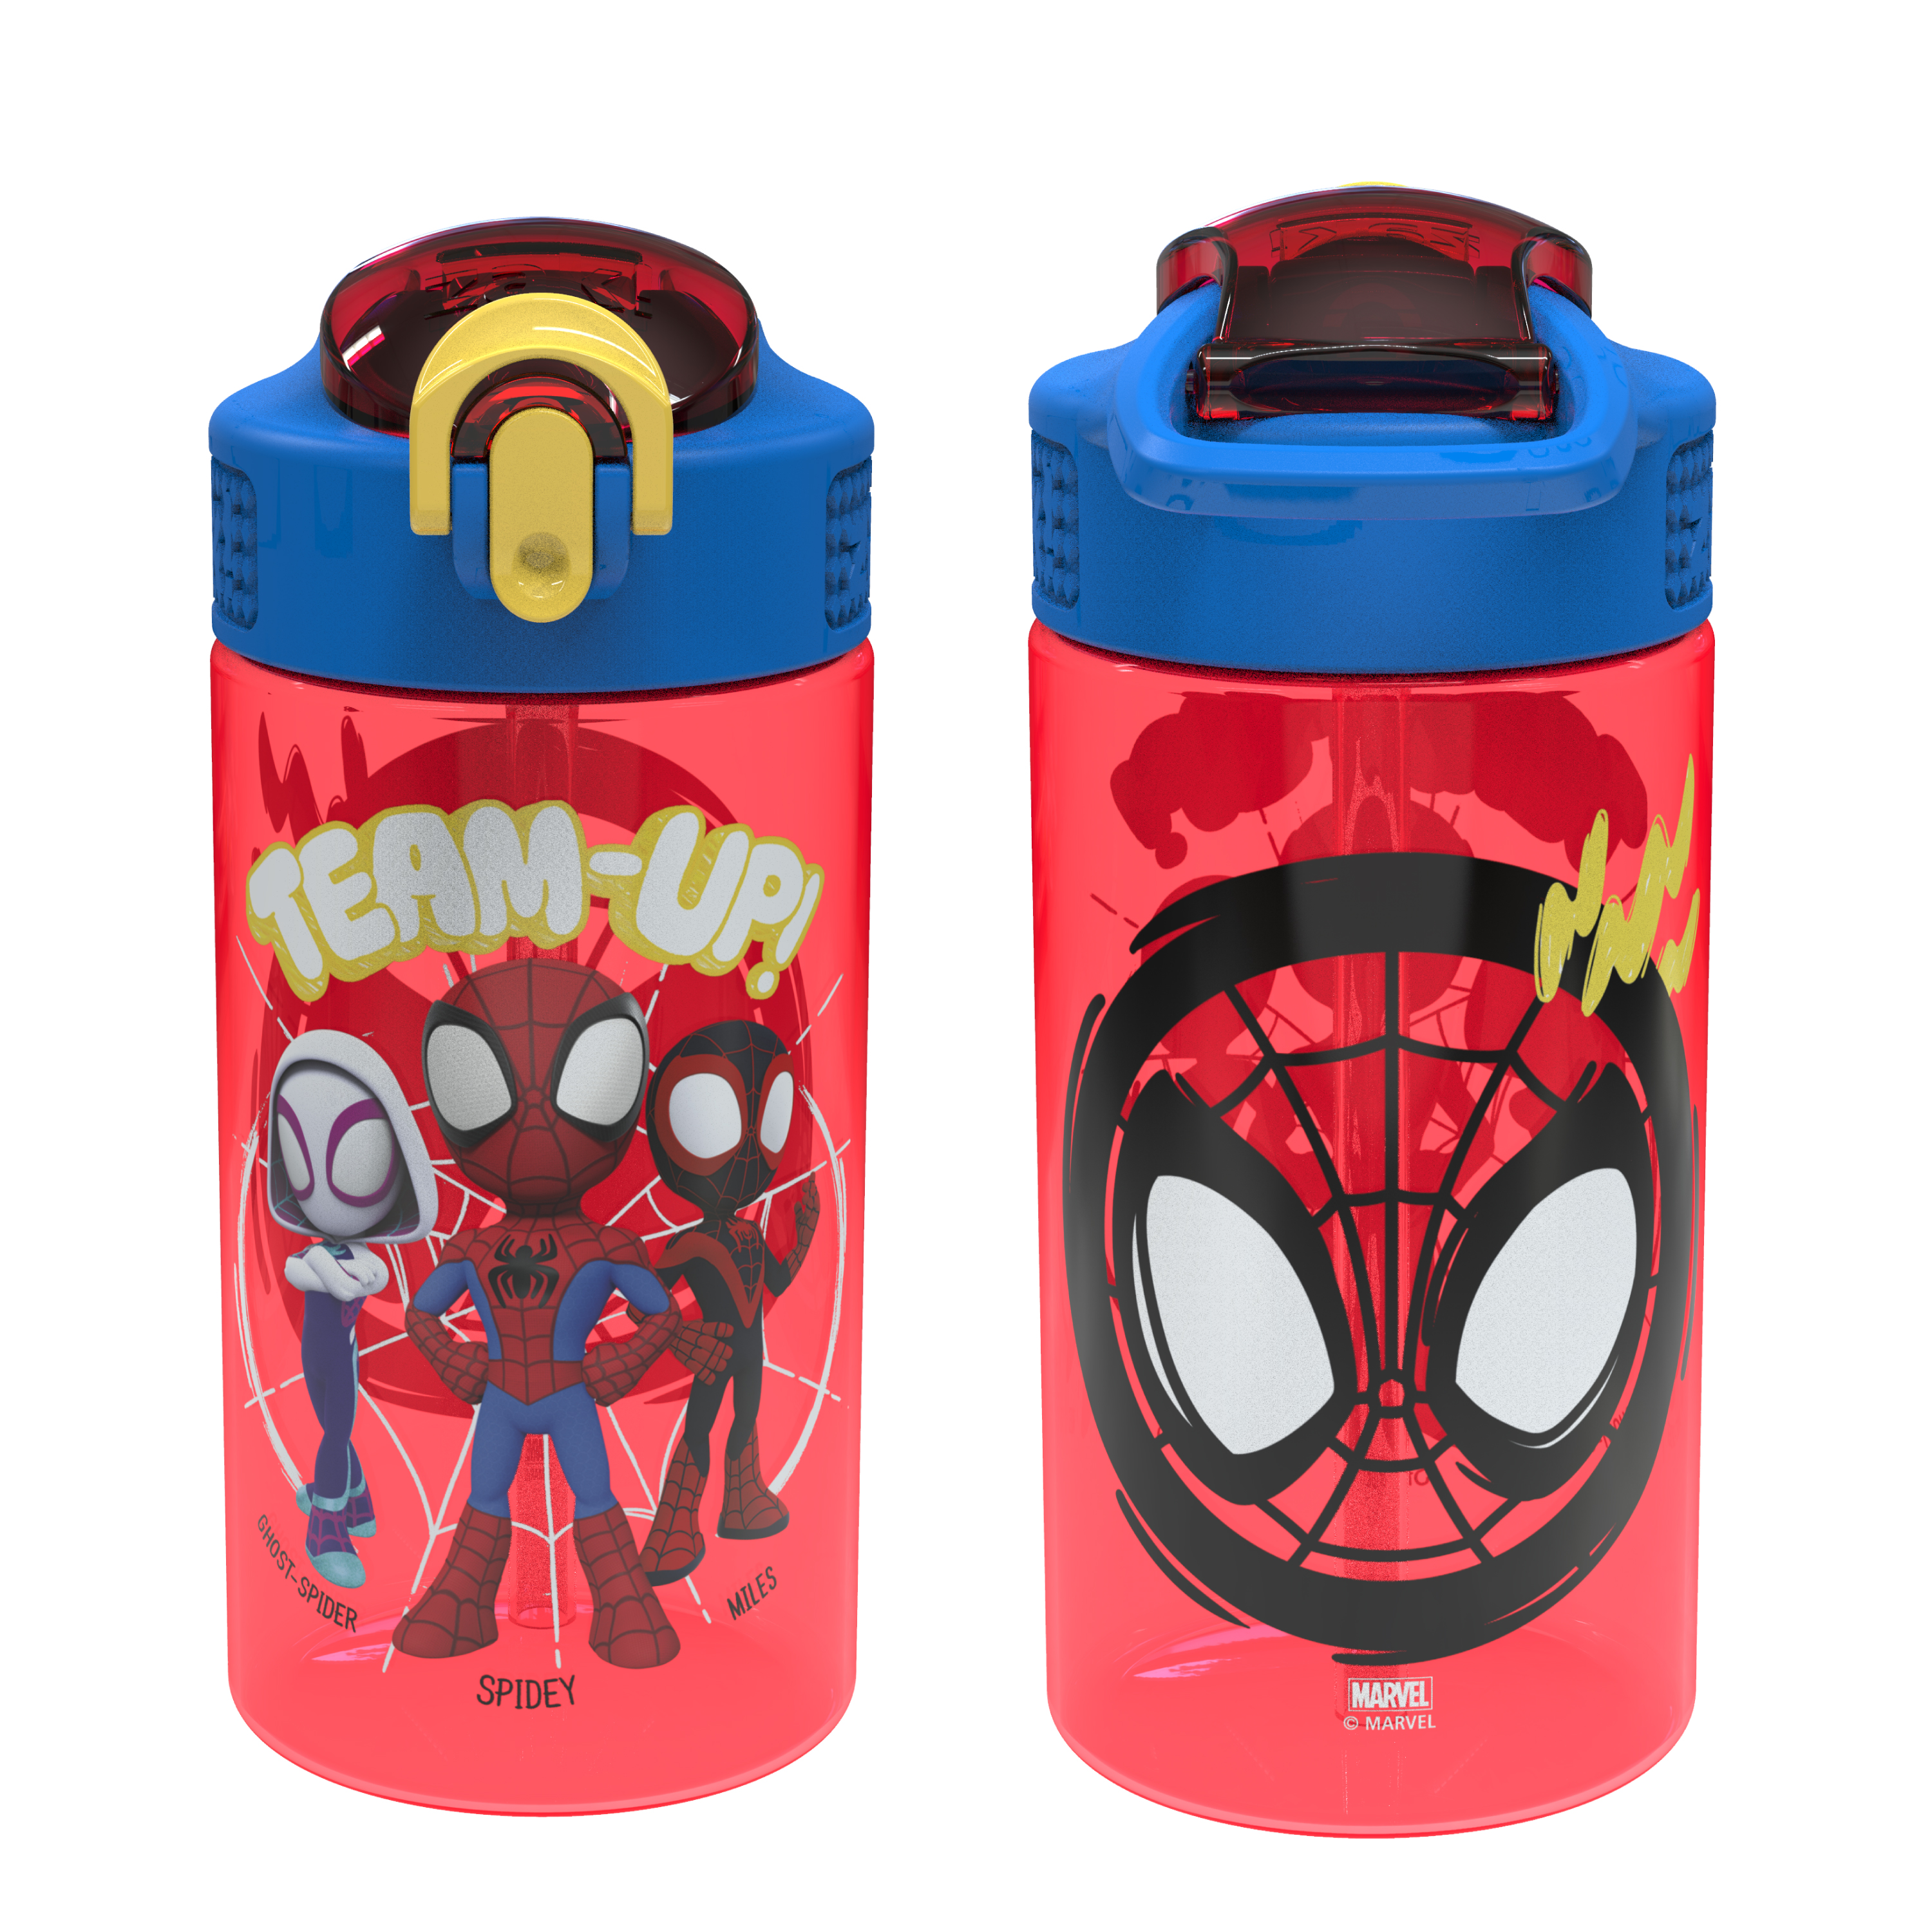 Spider-Man and His Amazing Friends 16 ounce Reusable Plastic Water Bottle with Straw, Spider-Friends, 2-piece set slideshow image 1